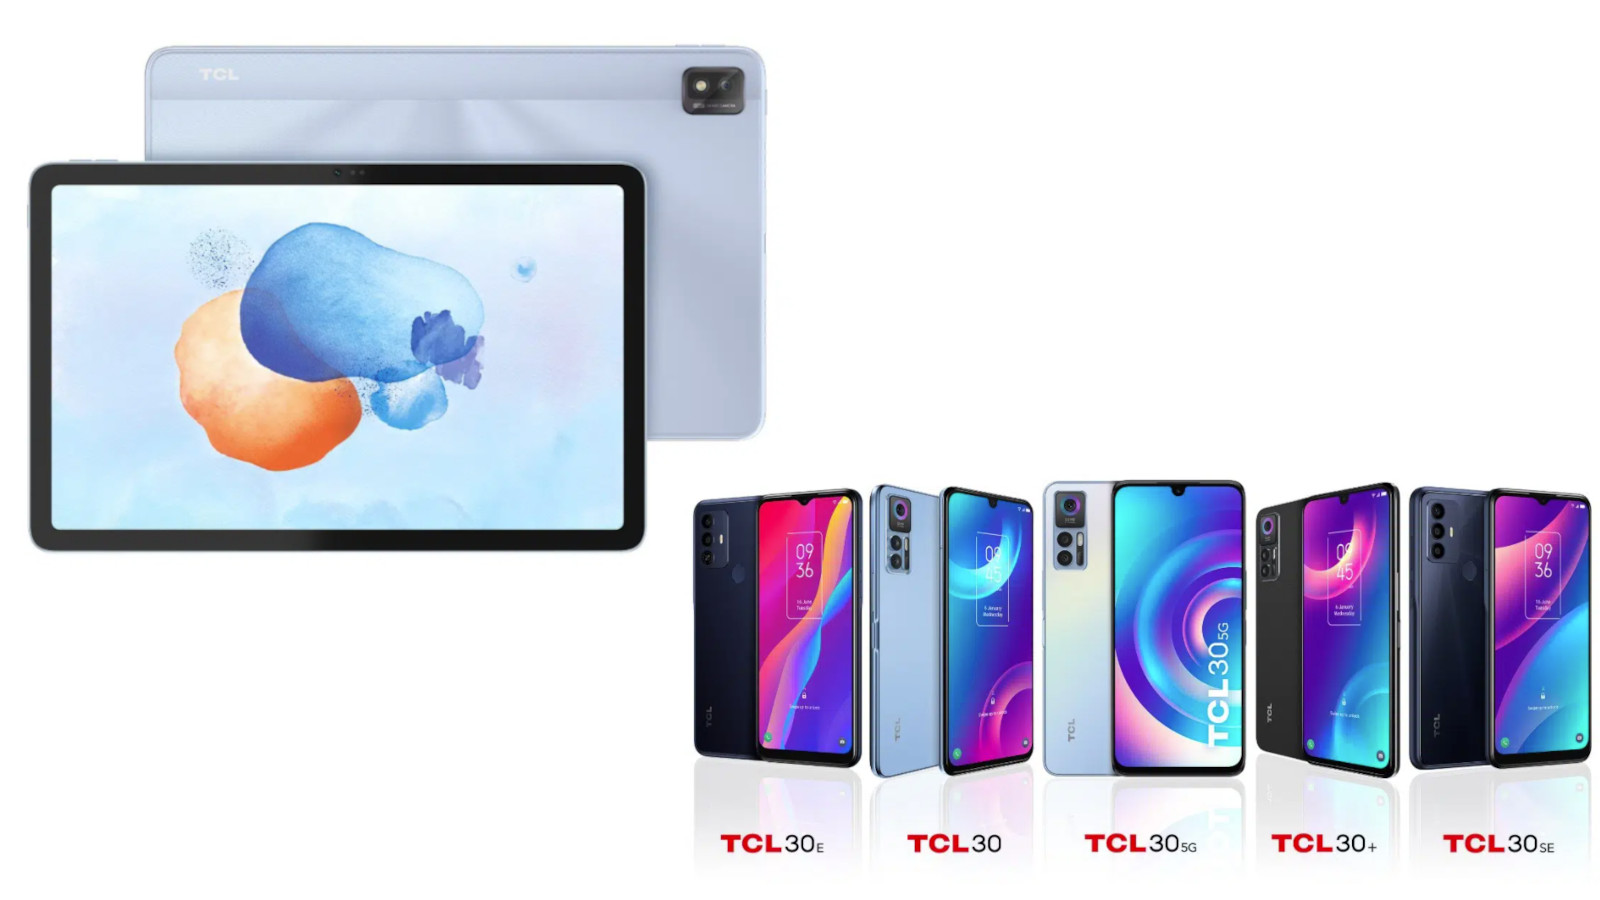 A composite image of the TCL Nxtpaper Max 10 tablet and the five TCL 30 series phones.